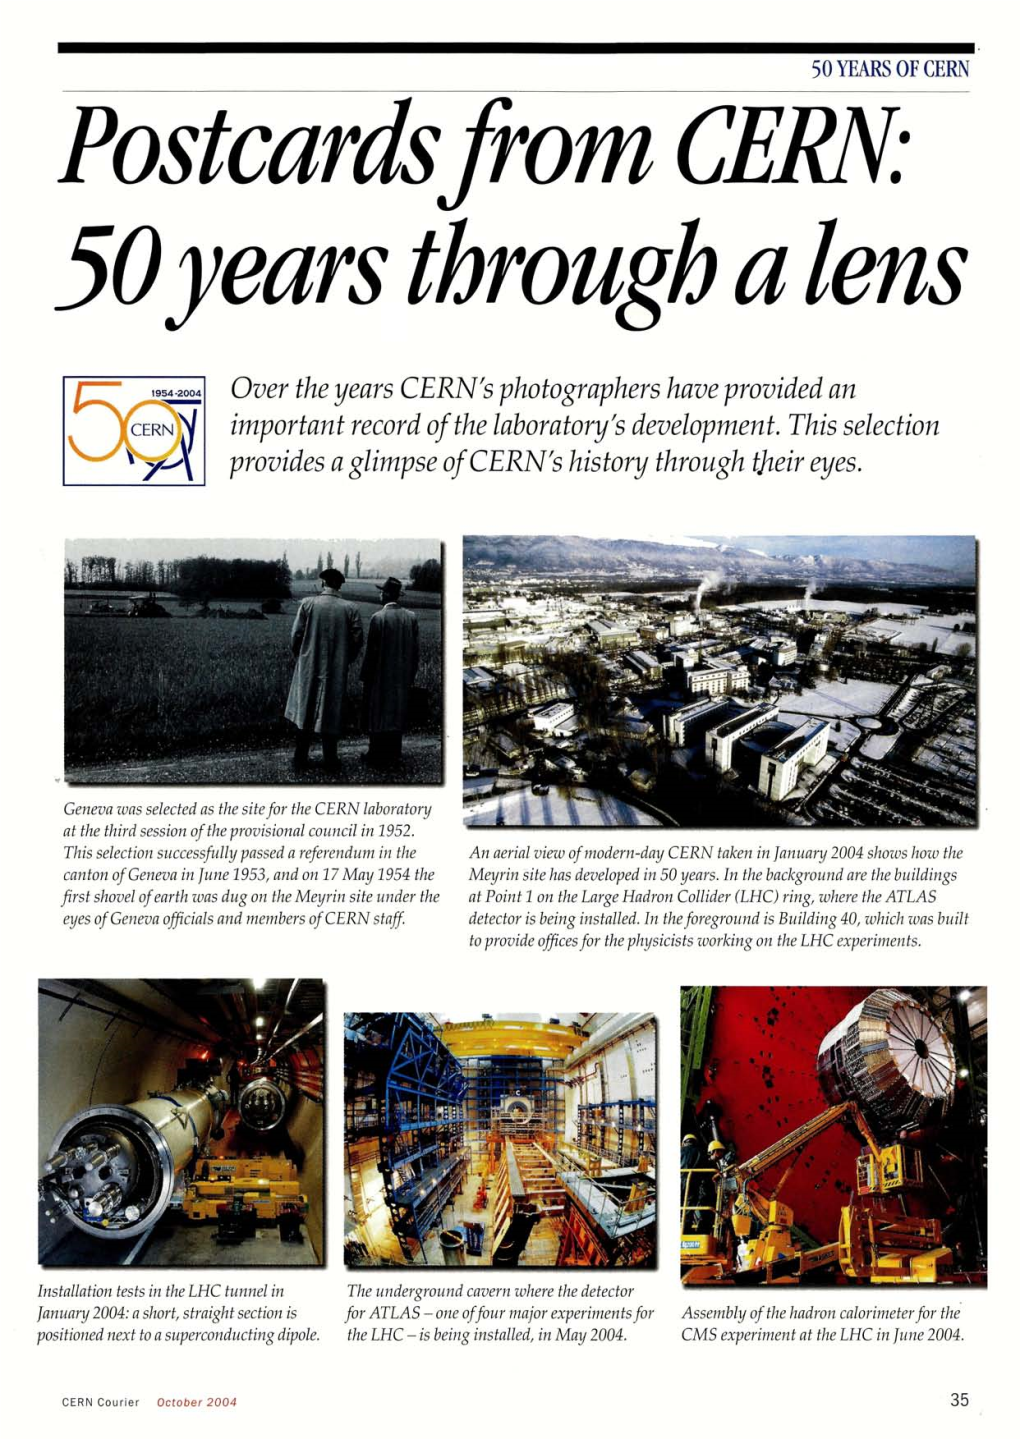 Postcards from CERN: 50 Years Through a Lens